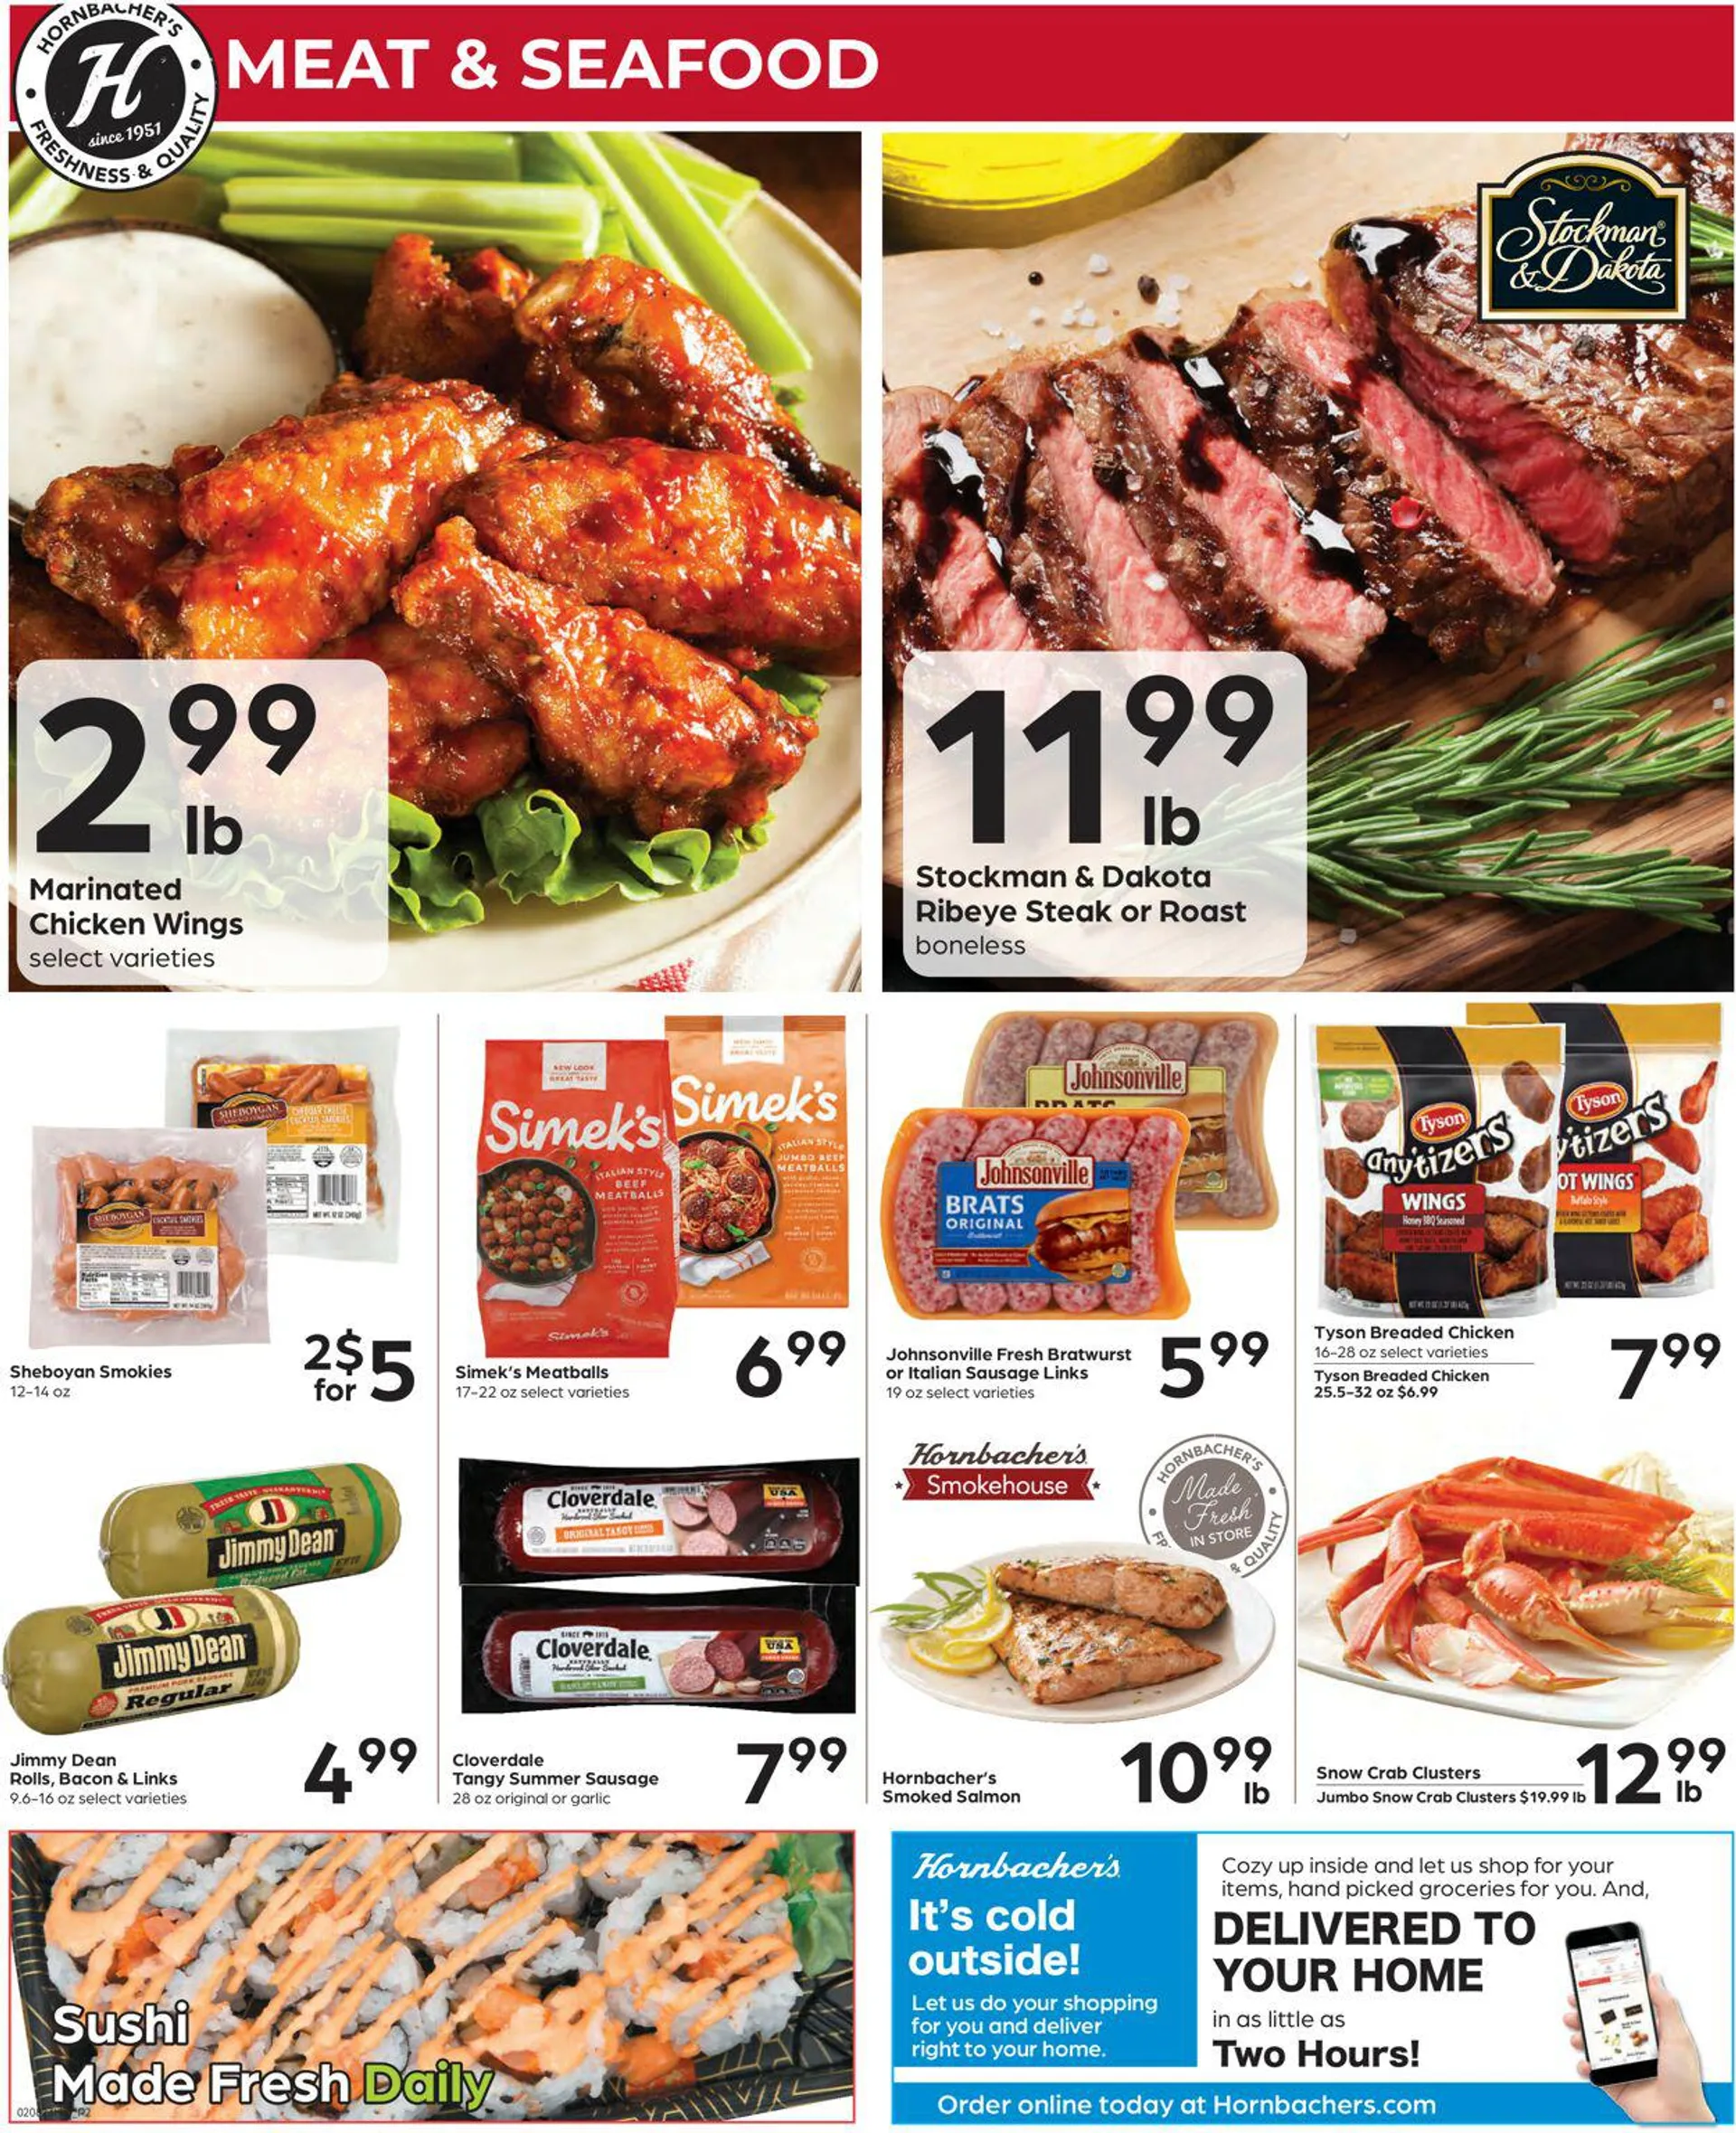 Hornbachers Current weekly ad - 2